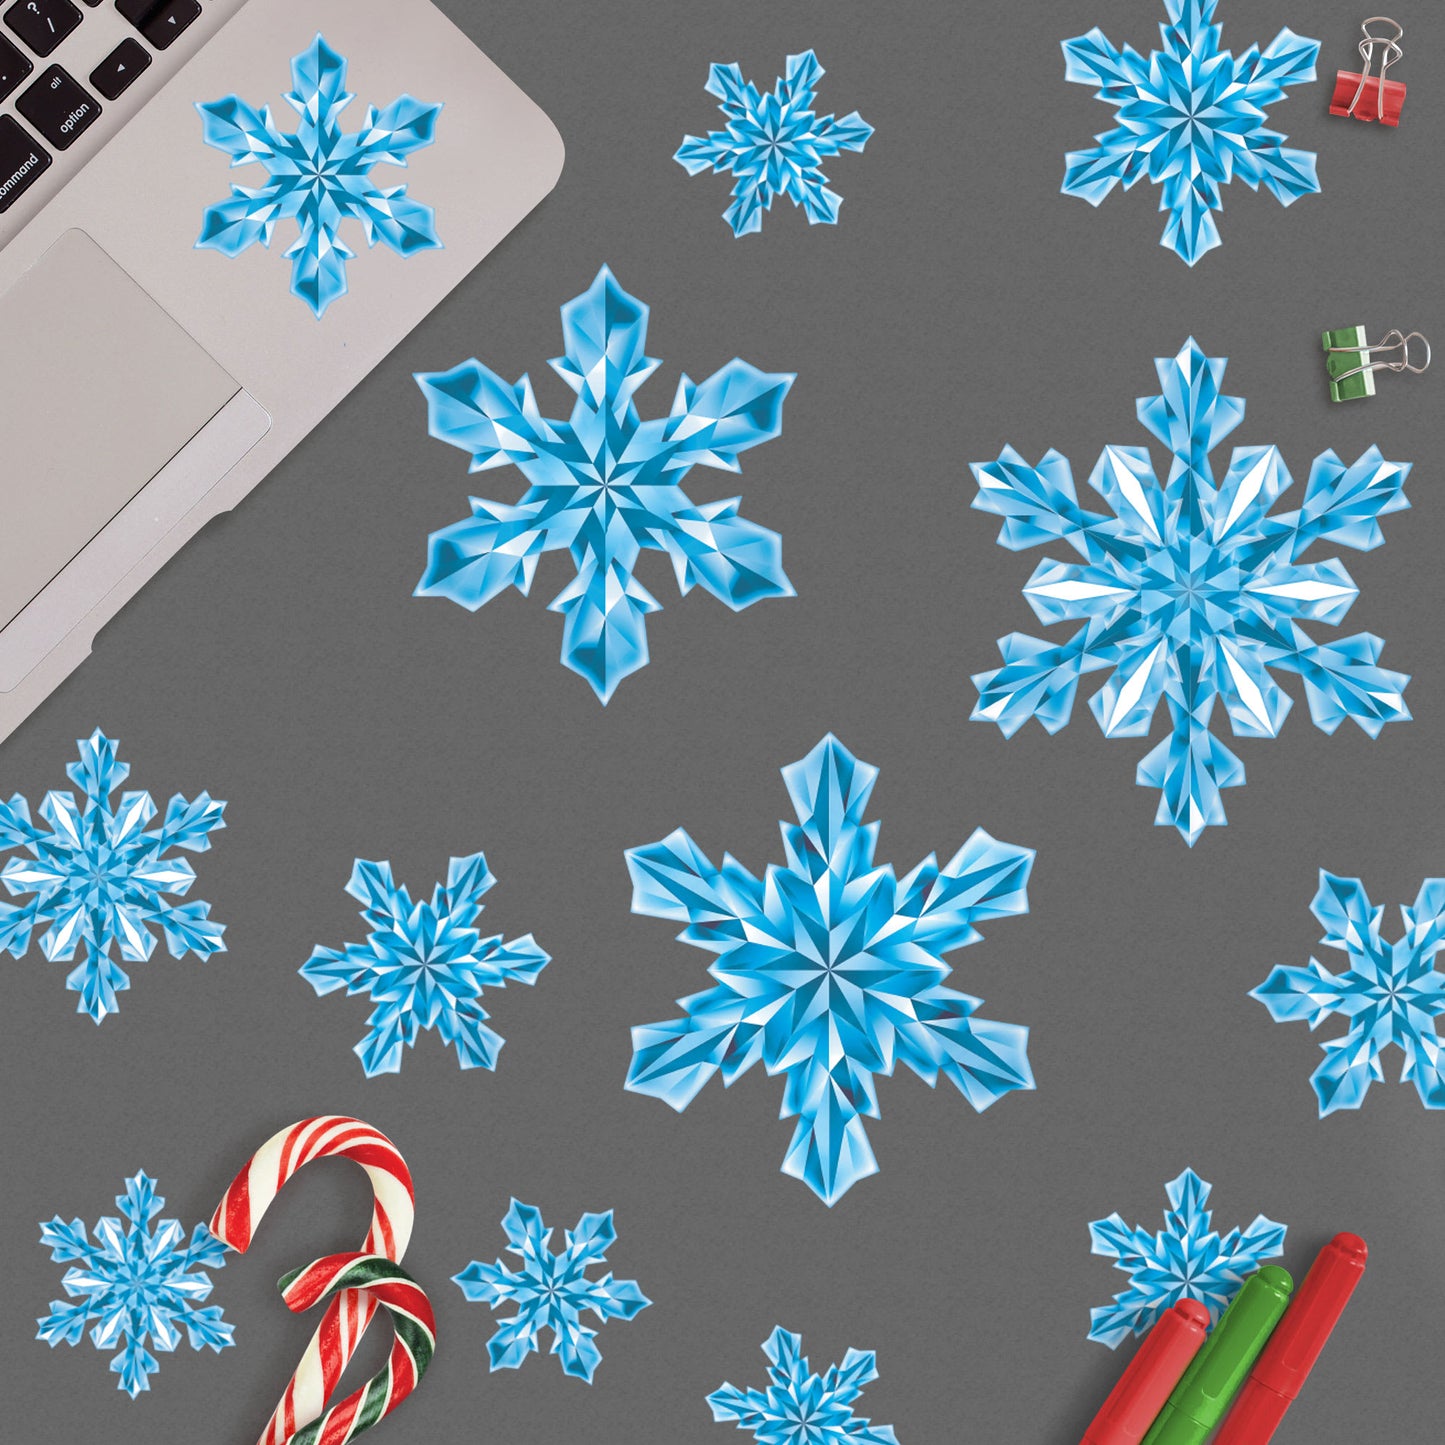 Snowflake Crystal Collection - Removable Vinyl Decal